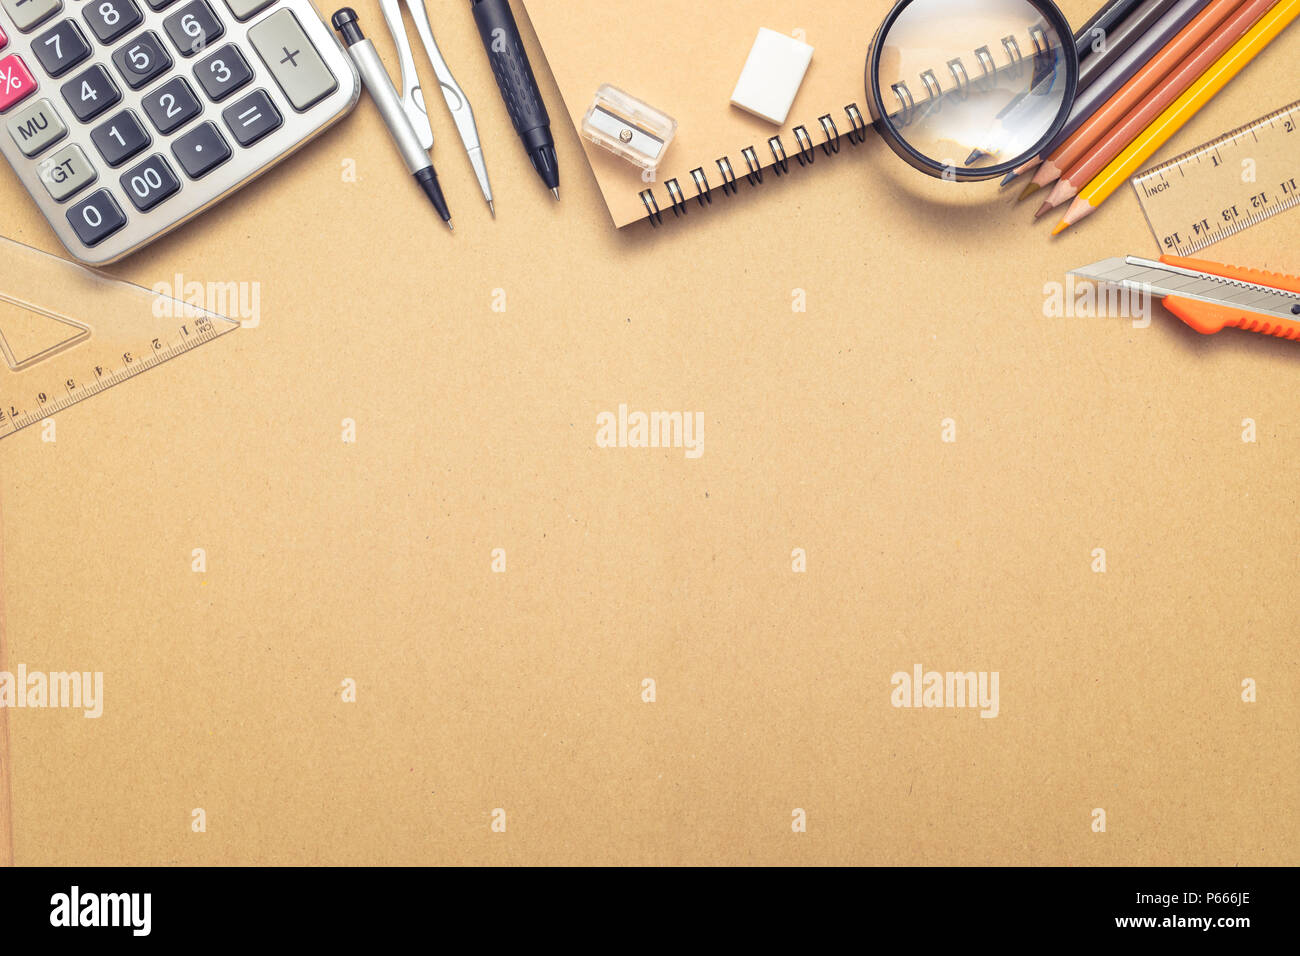 Overhead shot of school supplies on craft paper background Stock Photo